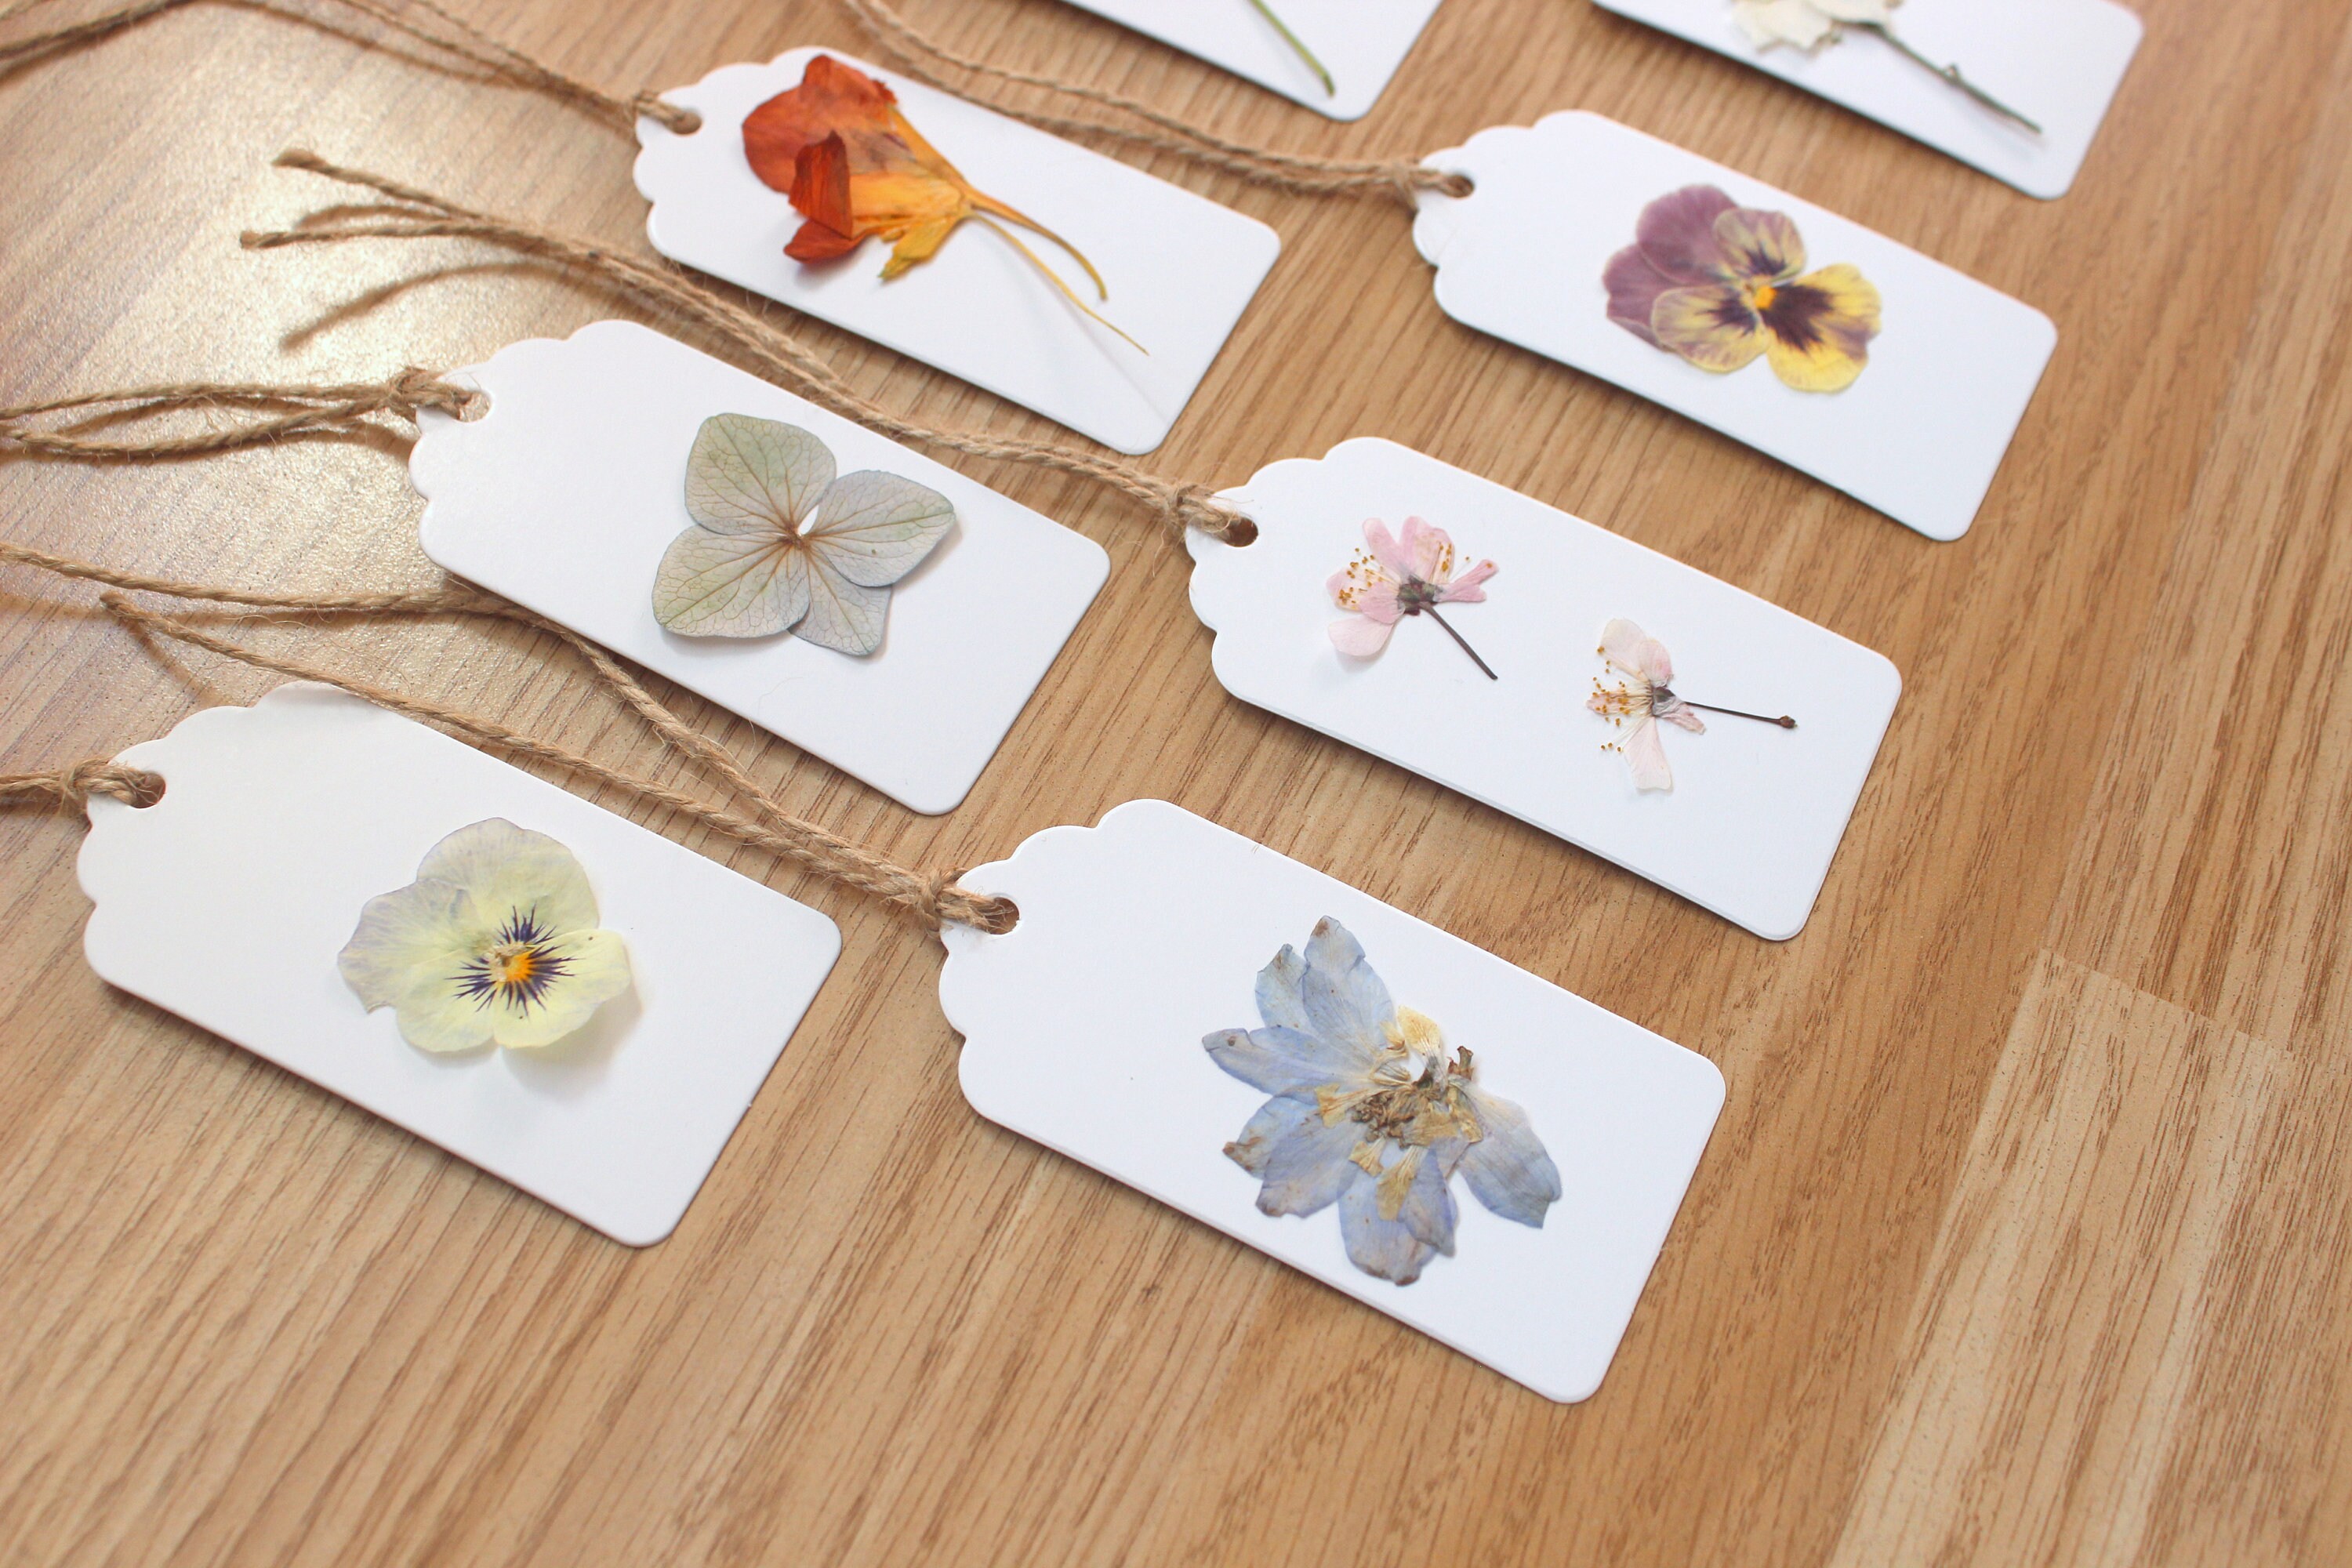 How to make dried flower gift tags: for a unique, floral touch